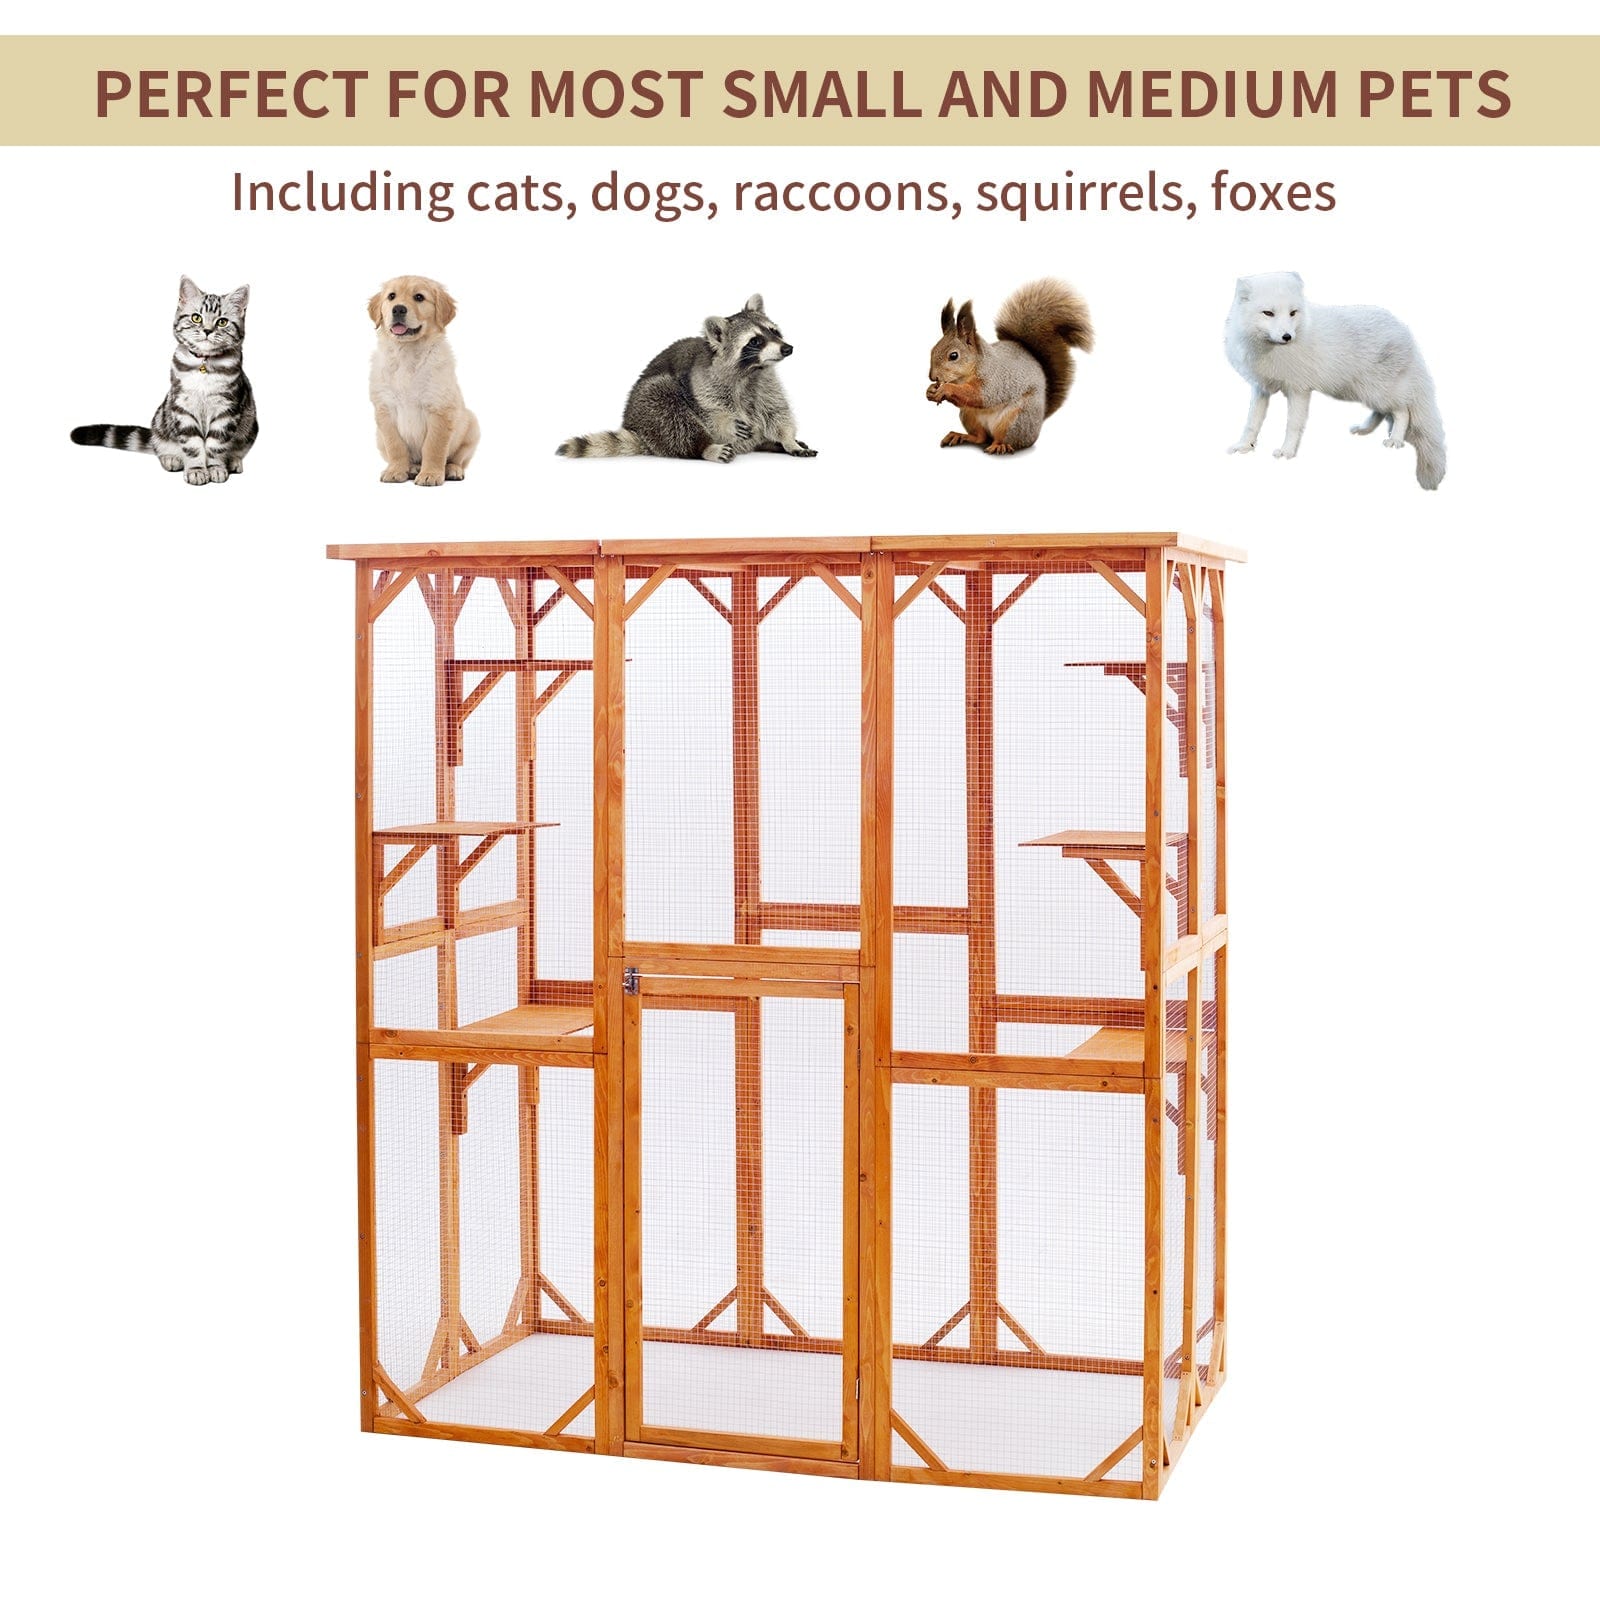 Elecwish Large Cat House Catio is perfect for most small and medium pets